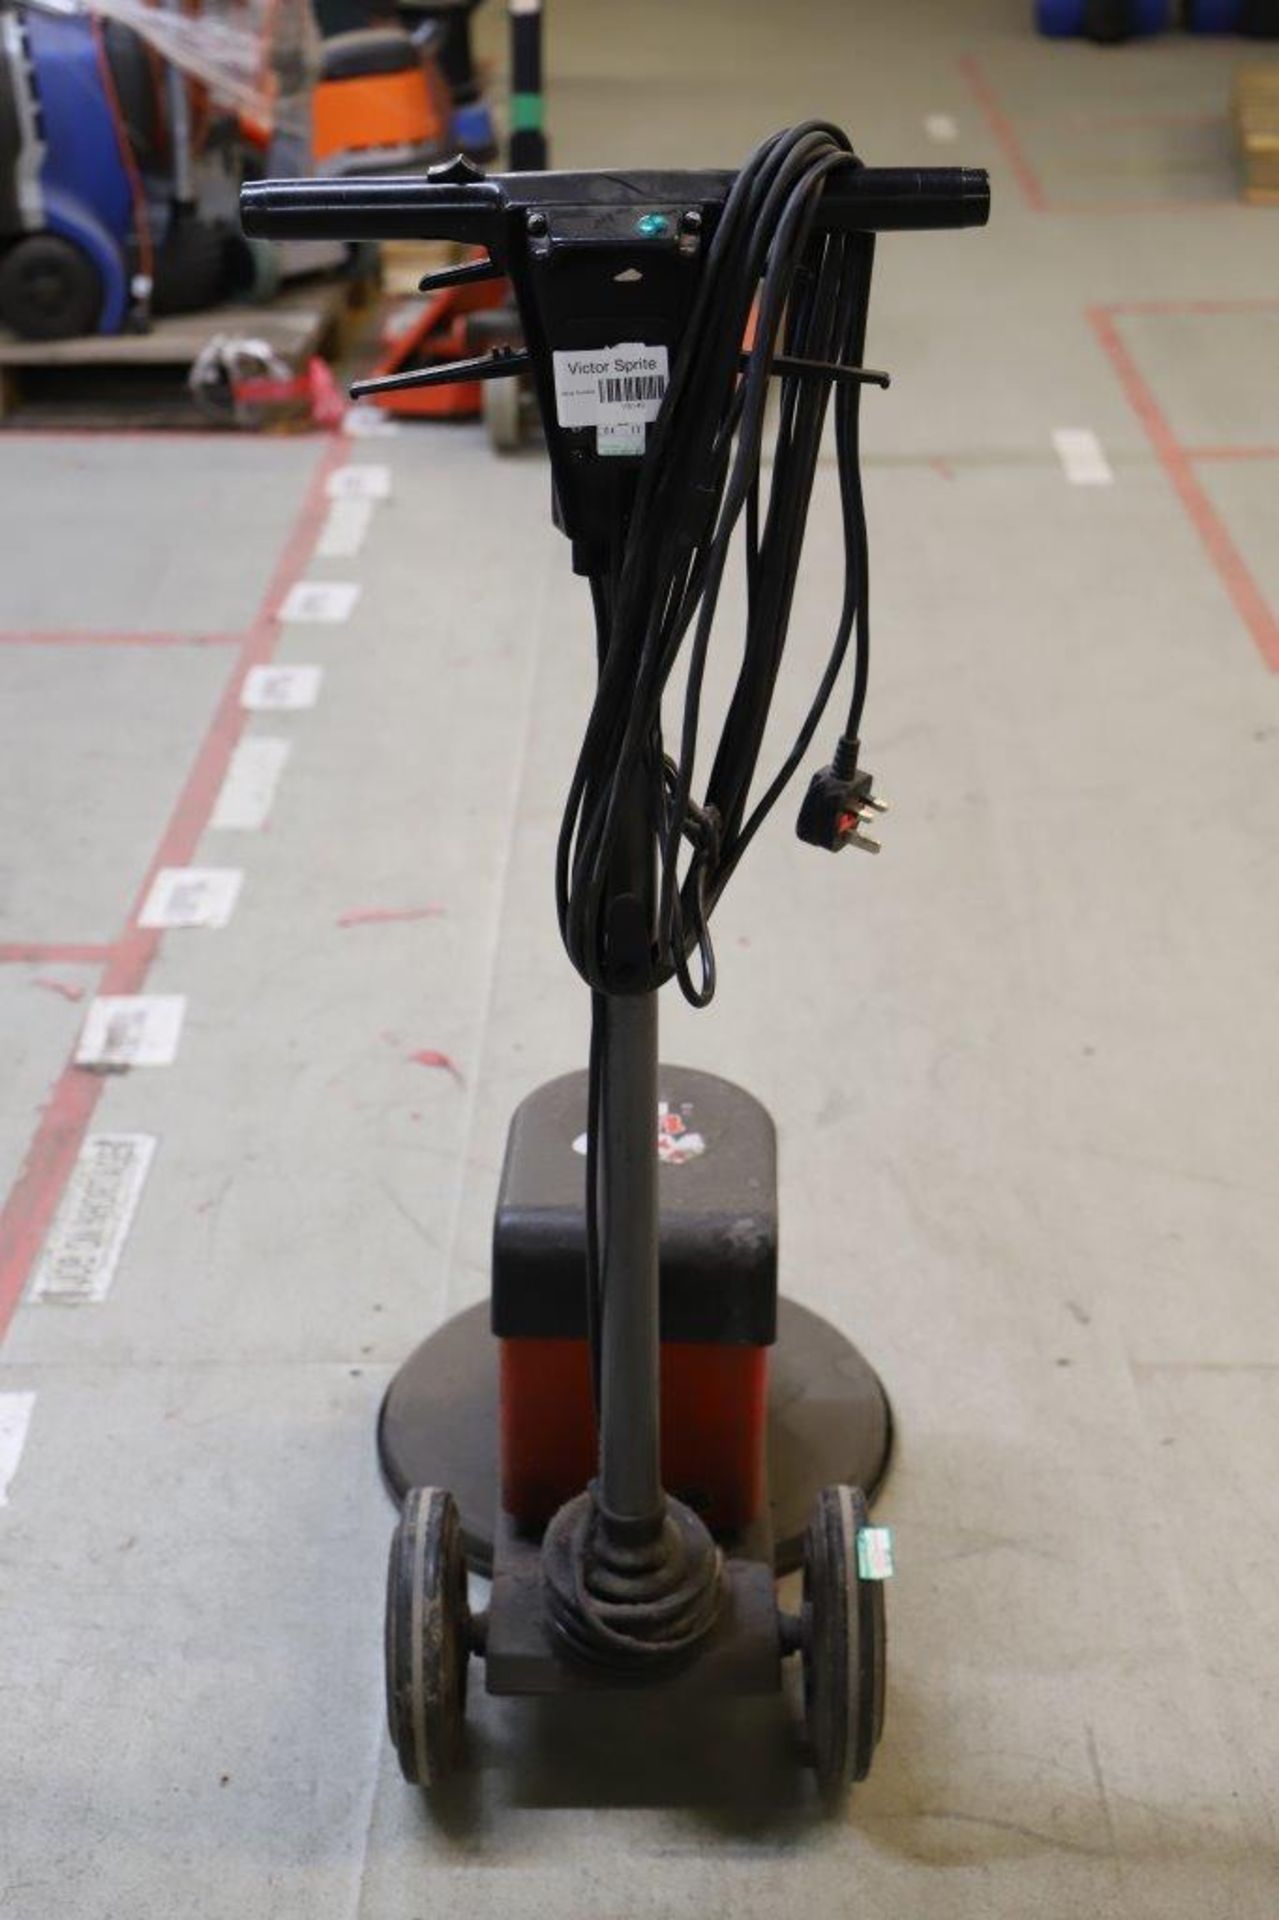 PAT tested Industrial cleaning machines, includes: HV380 BUFFER, TENNANT, TRUVOX, VICTOR SPRITE.